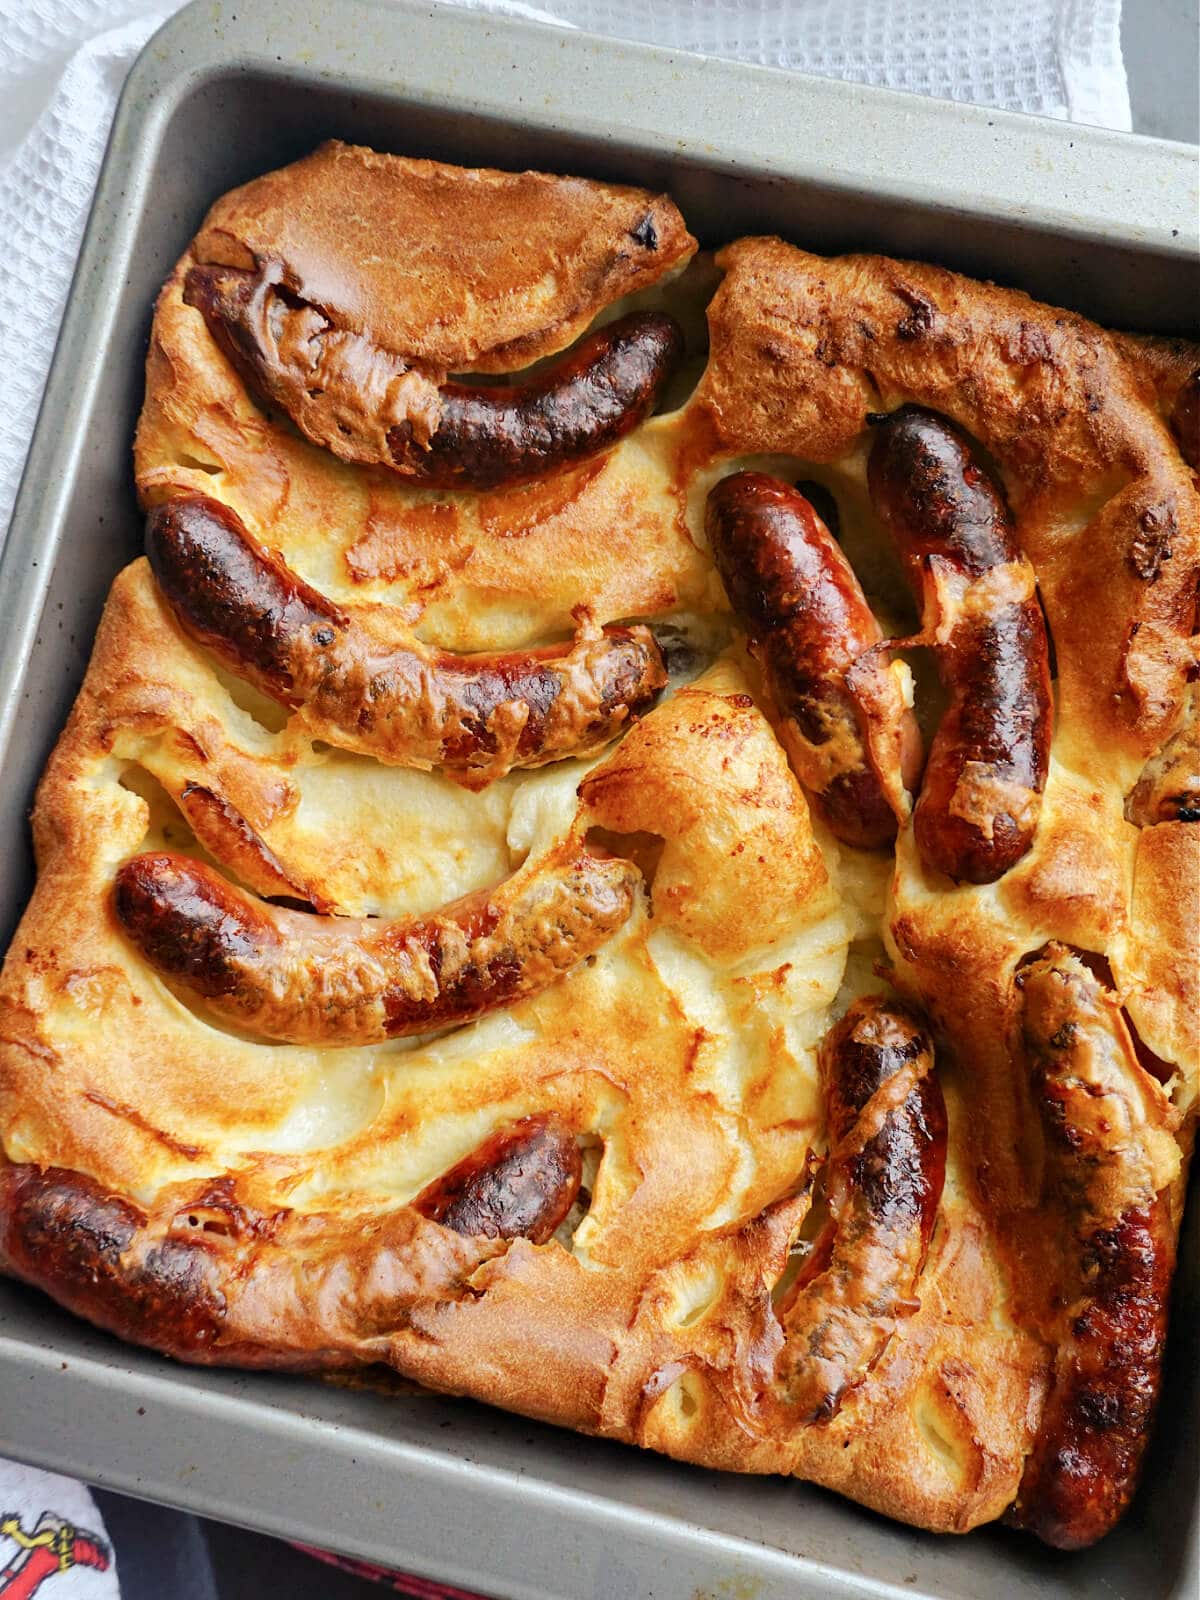 A toad in the whole in an oven tray.